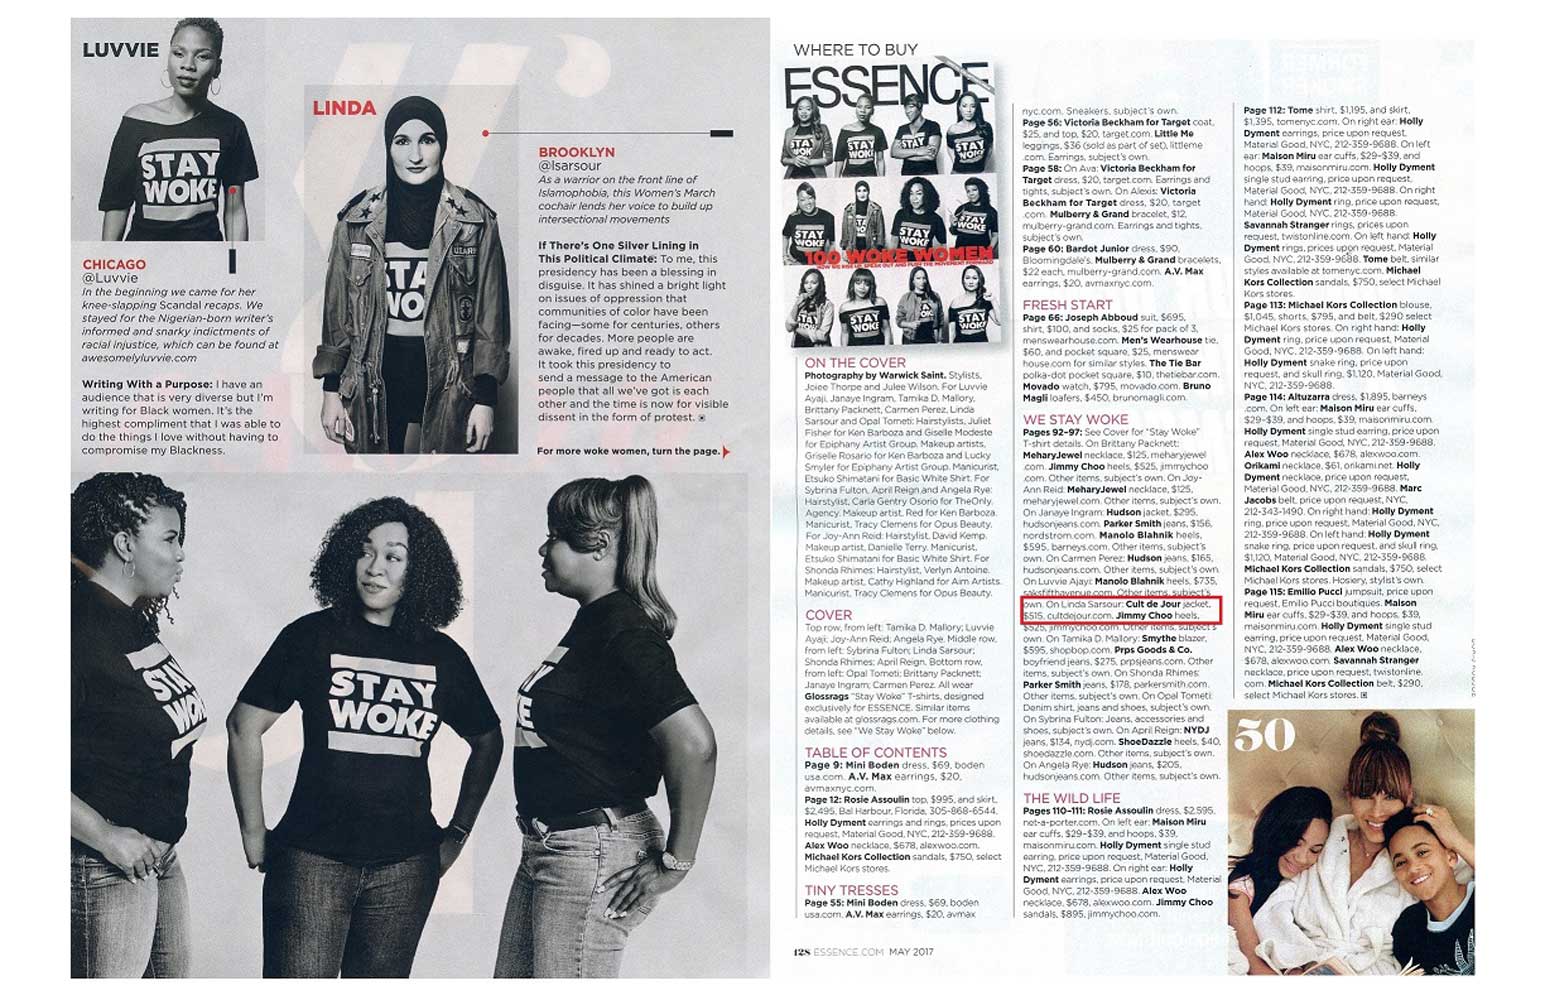 Essence Magazine page spread with photo of Cult de Jour jacket and credit to Cult de Jour. Text reads: On Linda Samsour: Cult de Jour jacket.